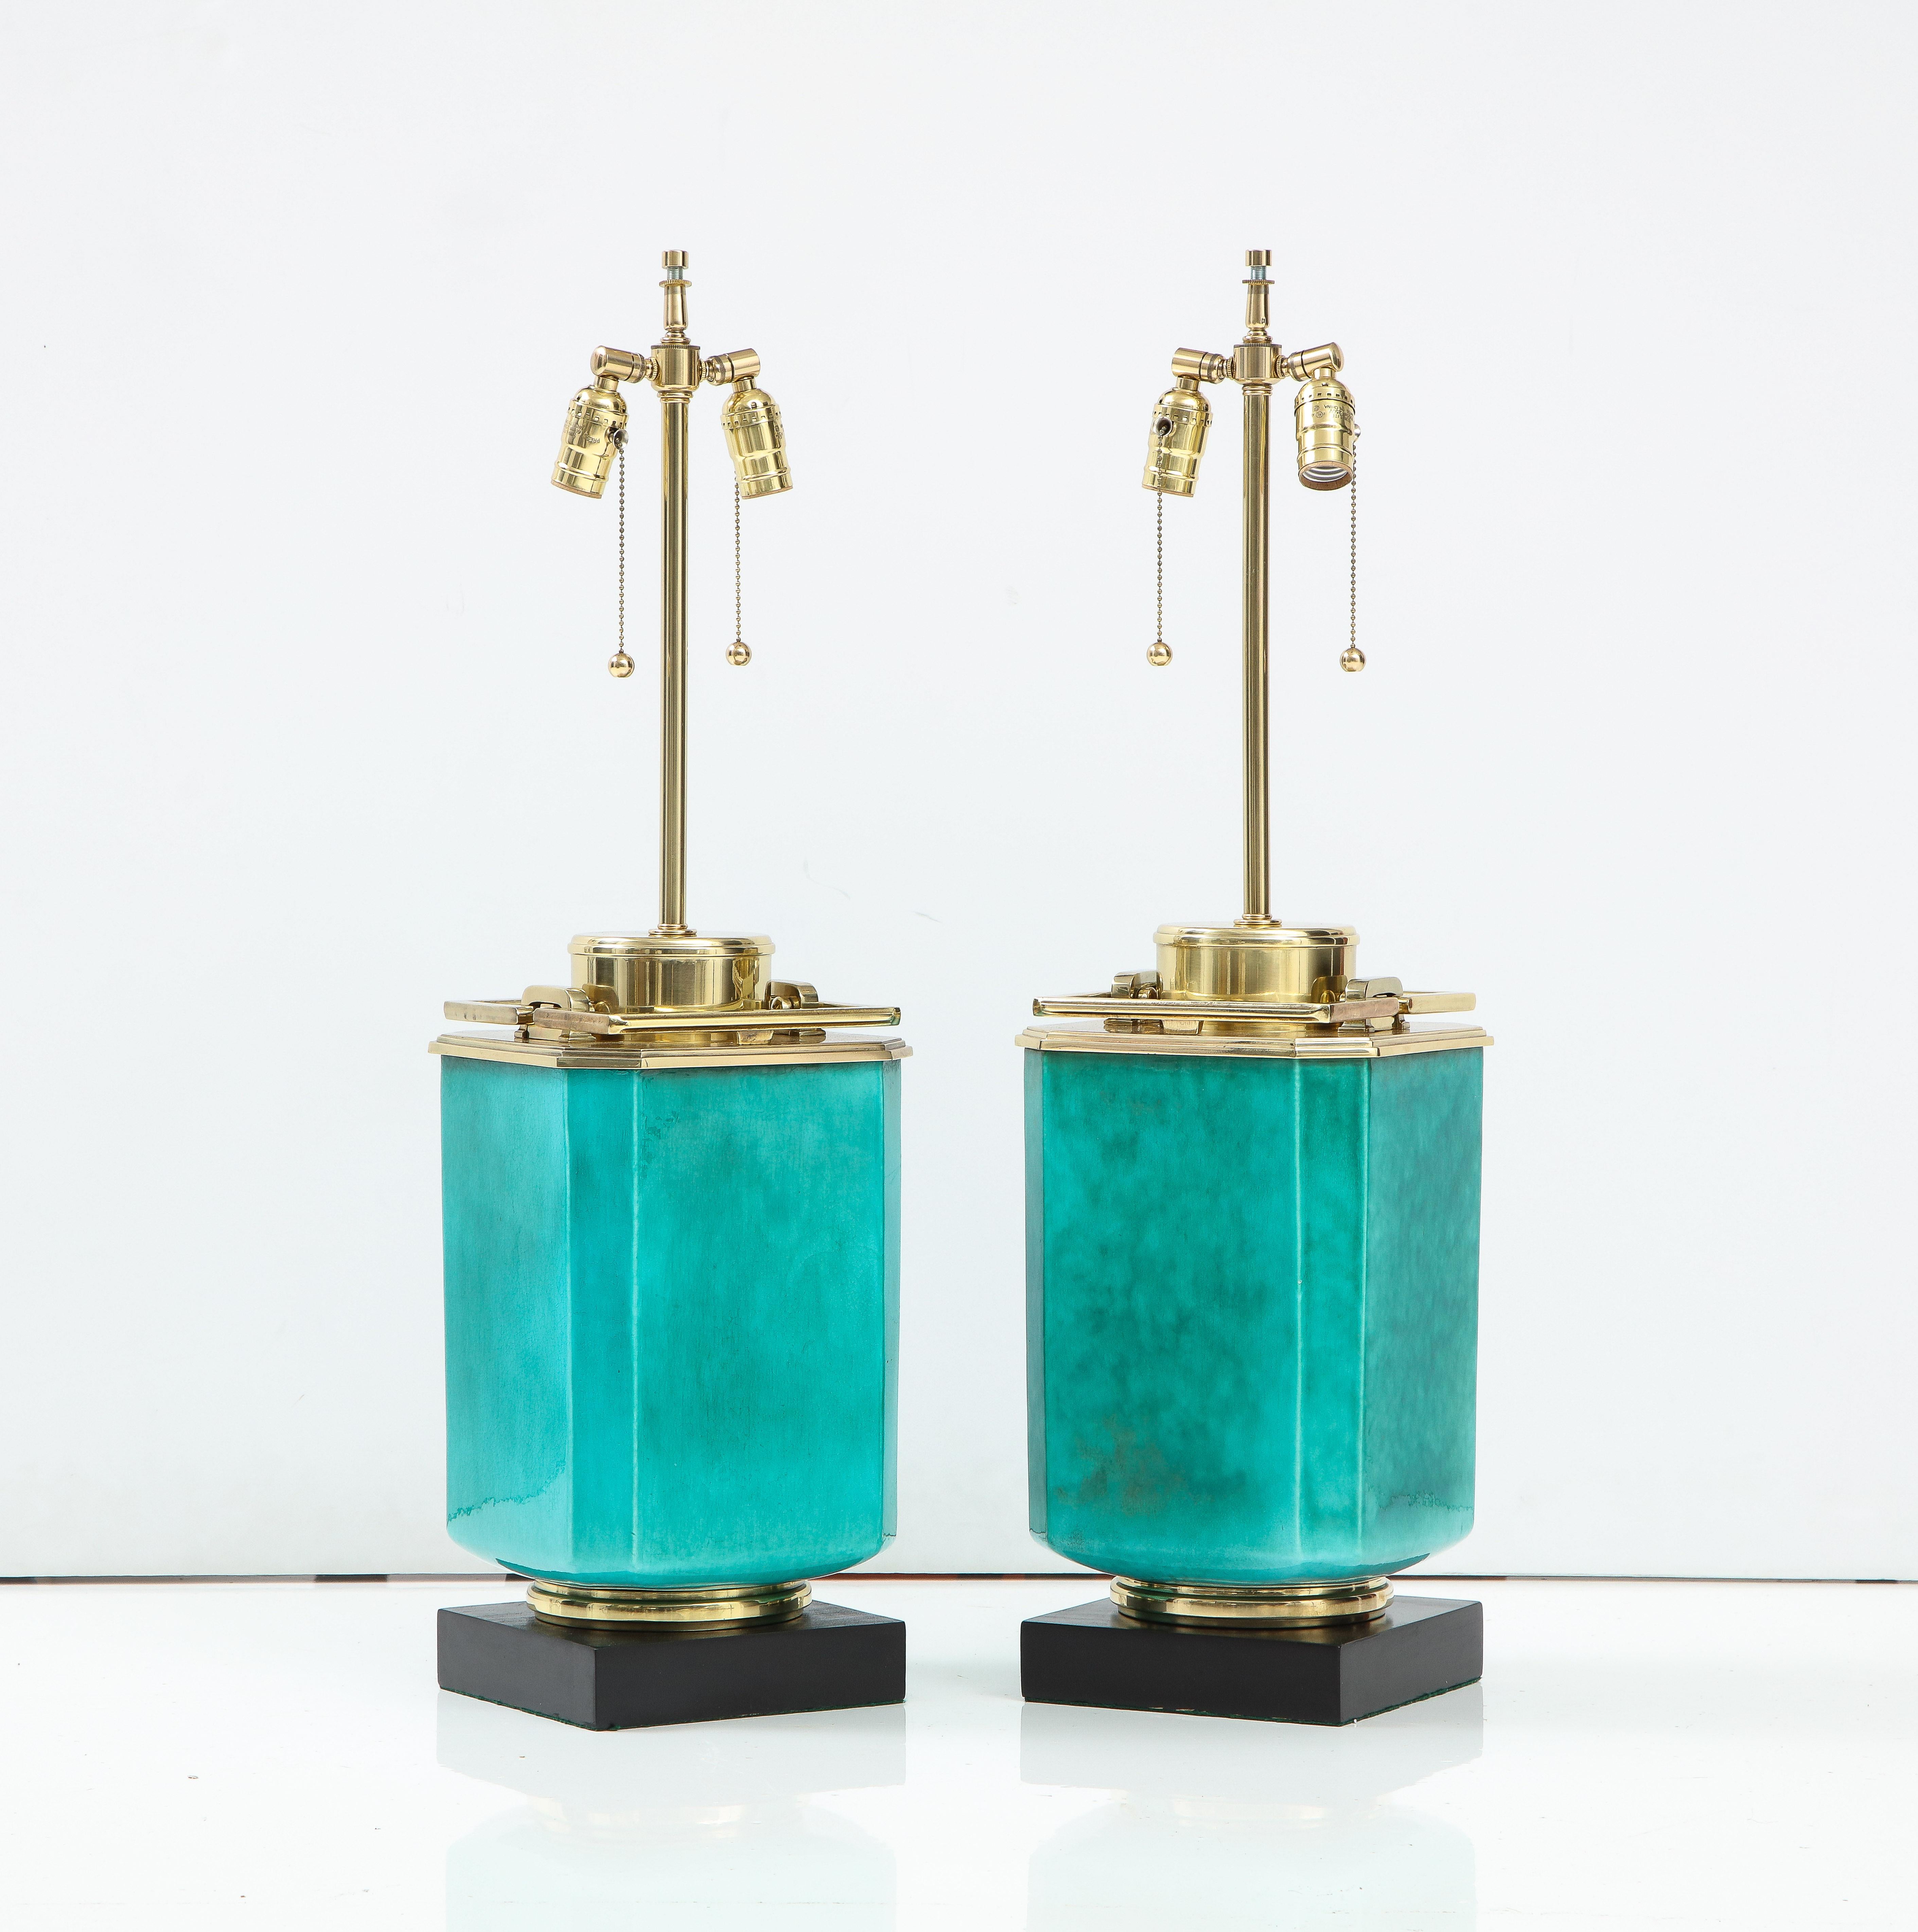 Pair of impressive large scale porcelain lamps featuring an emerald green glaze body and heavy brass decorative elements. Lamps have been rewired for use in the USA using double cluster sockets, 75W max each socket. Meticulously restored.